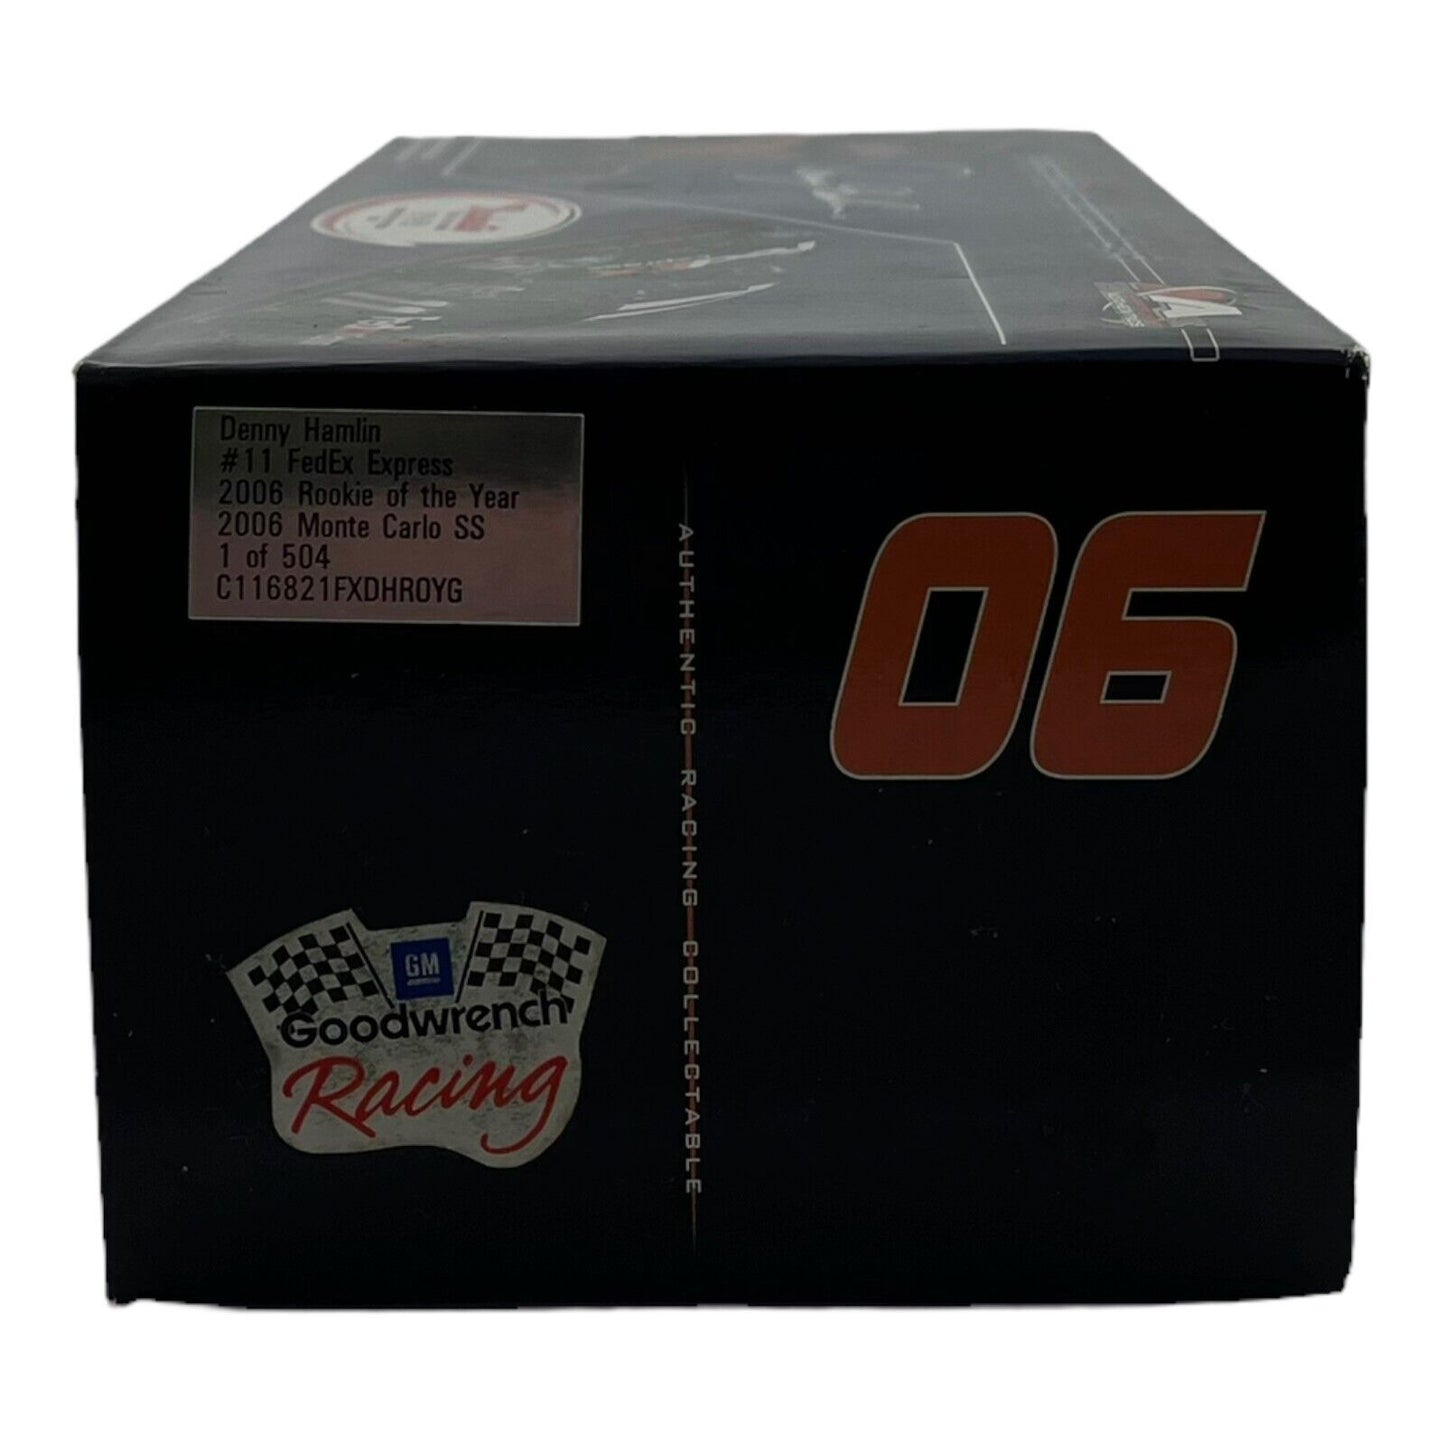 1:24 Scale Denny Hamlin #11 FedEx Express Rookie of the Year Diecast 1 of 504